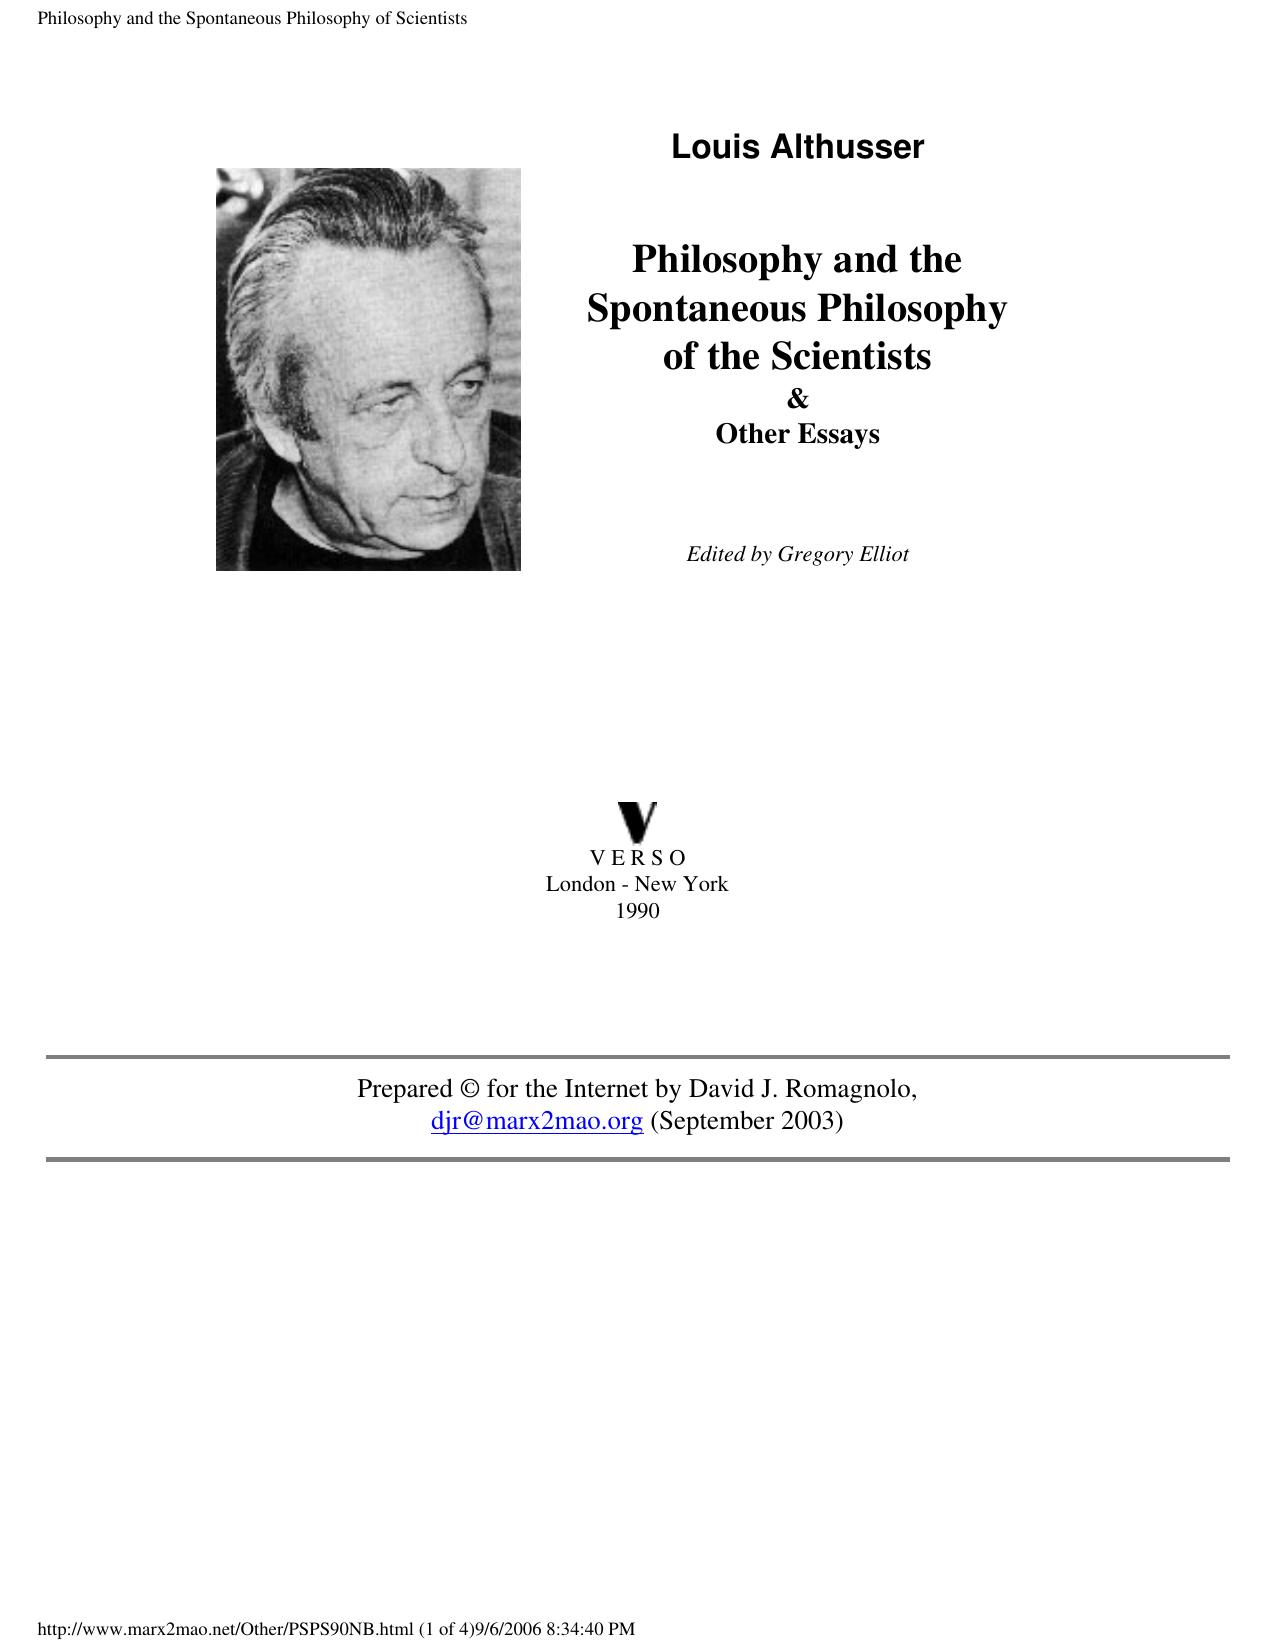 Philosophy and the Spontaneous Philosophy of Scientists - Essay